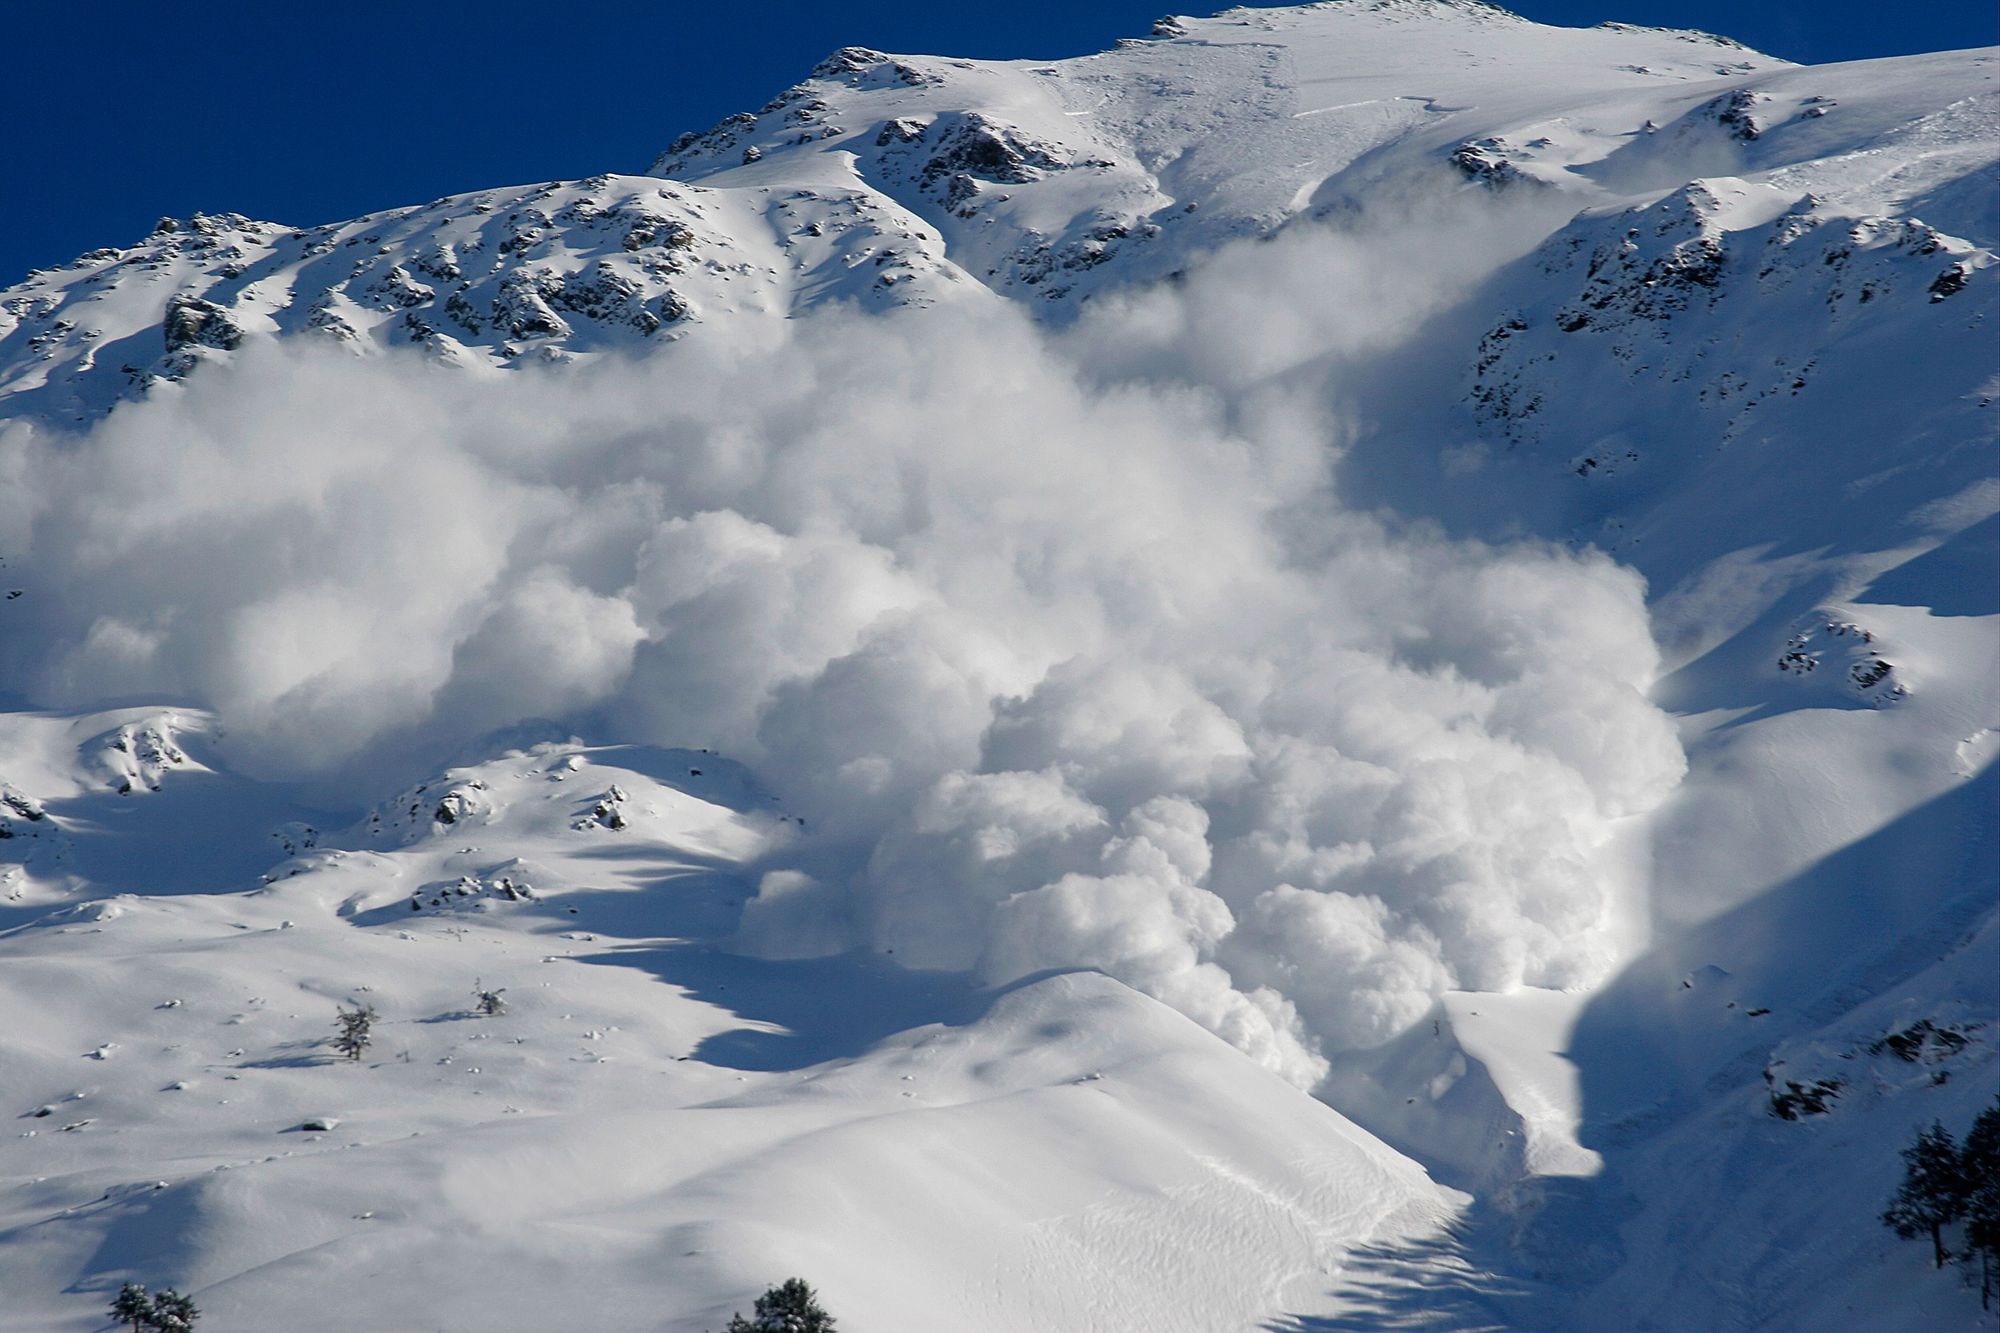 A dry snow avalanche in the mountains.